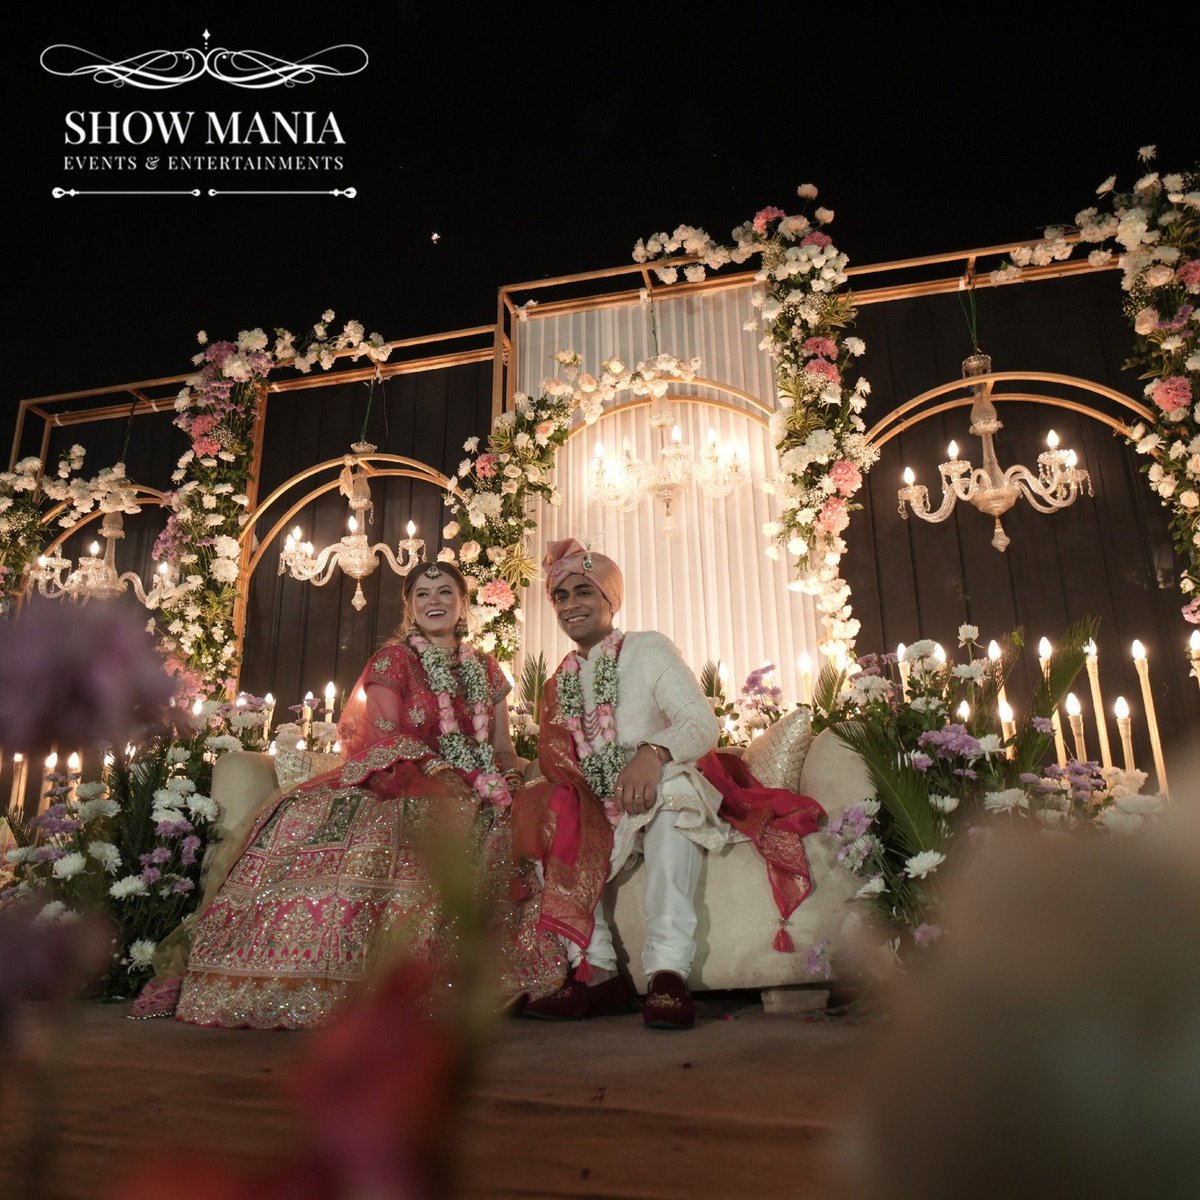 True love knows no bounds! Witnessing the celebration of the newlyweds’ beautiful couple with resplendent wedding decor

Venue- The Palace
Couple - Aditya & Lauren

To know more, visit showmaniaevents.com
. 
. 
.
#showmaniaevents #dreamwedding #luxury #bigwedding #stagesetup